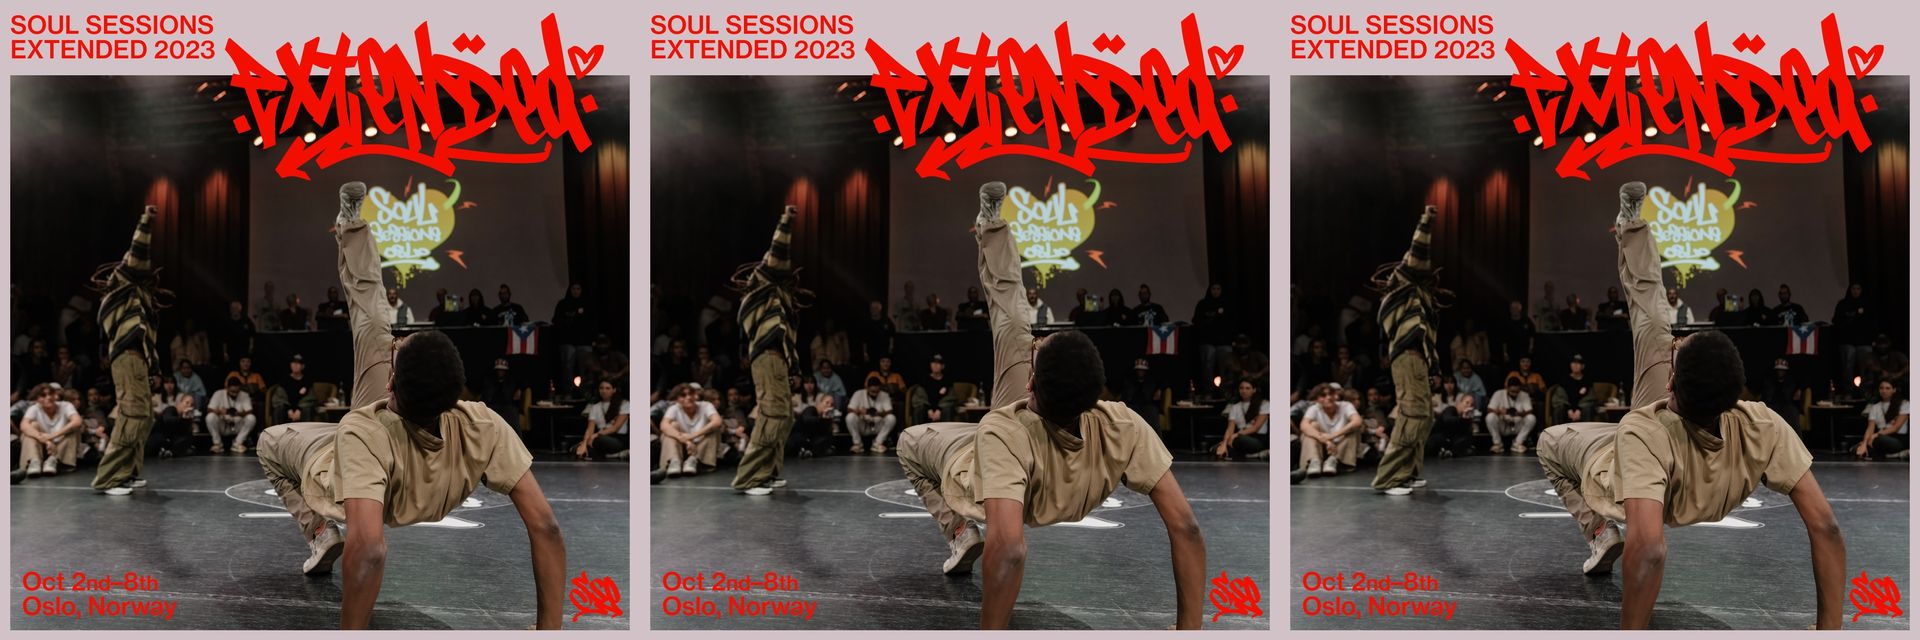 Soul Sessions Extended.